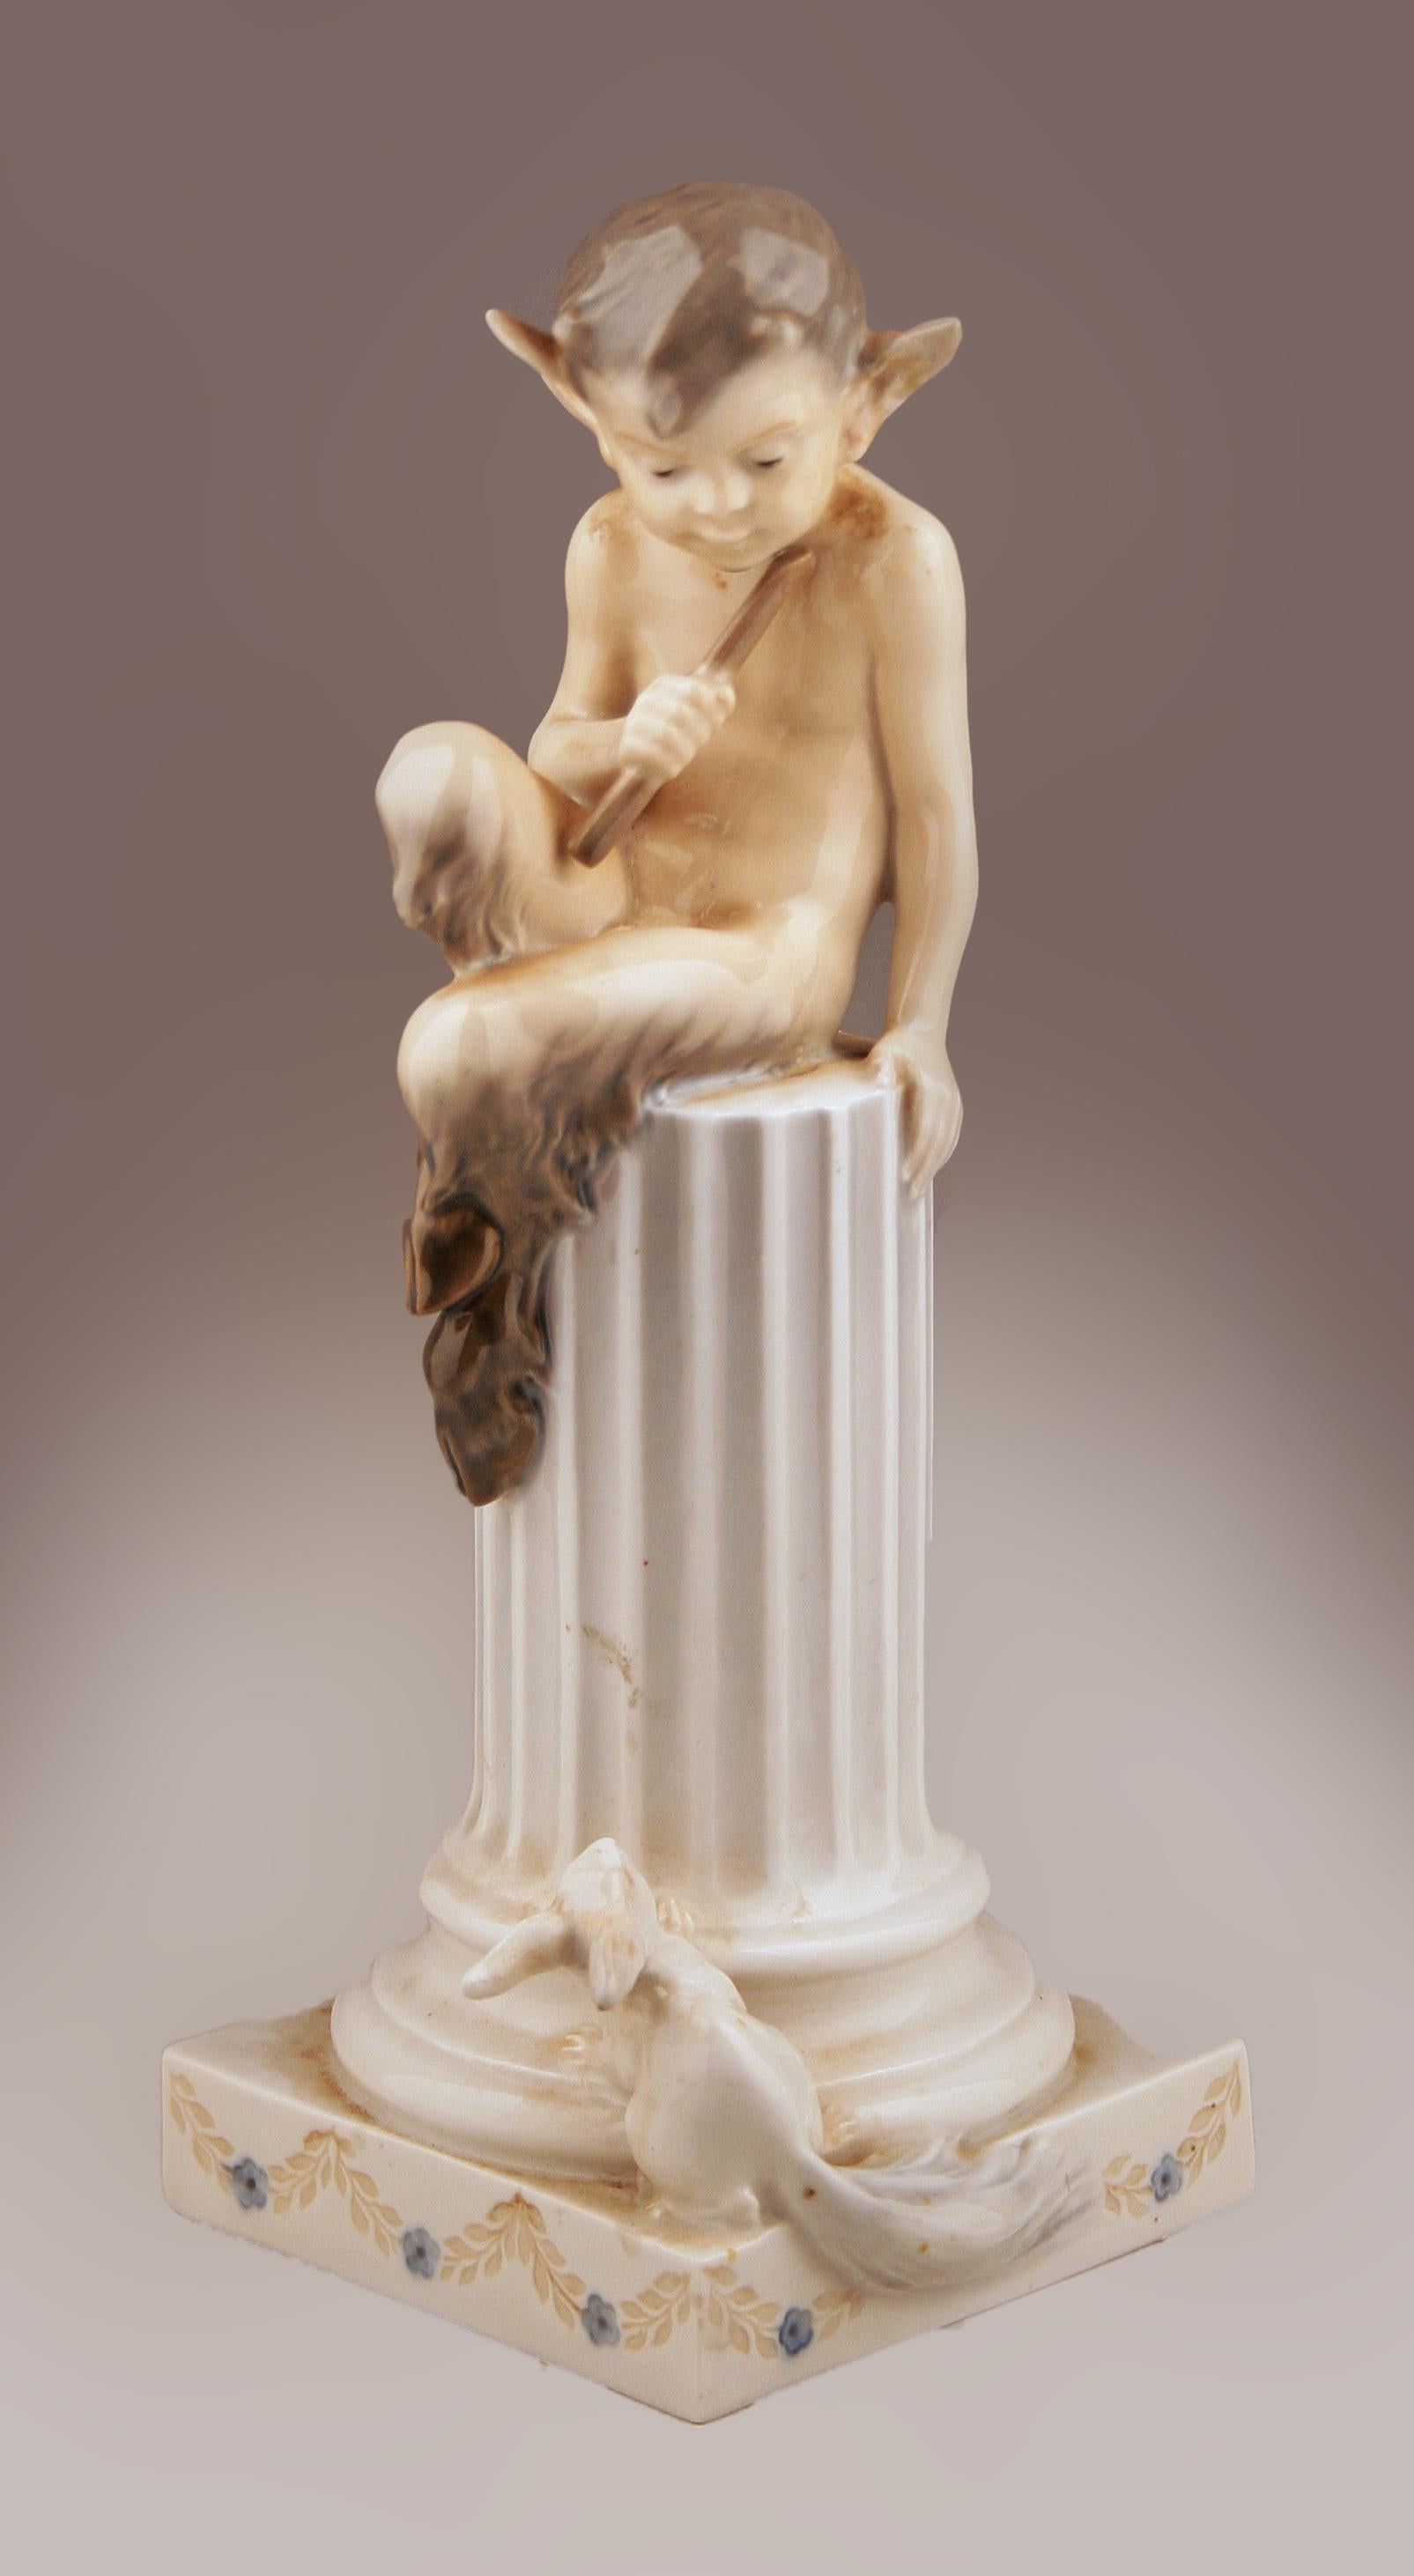 Mid-20th century danish glazed porcelain sculpture of Faun (satyr) sitting over a column and a rabbit by danish firm Royal Copenhagen

By: Royal Copenhagen
Material: porcelain, paint, ceramic
Technique: glazed, hand-painted, pressed, molded,